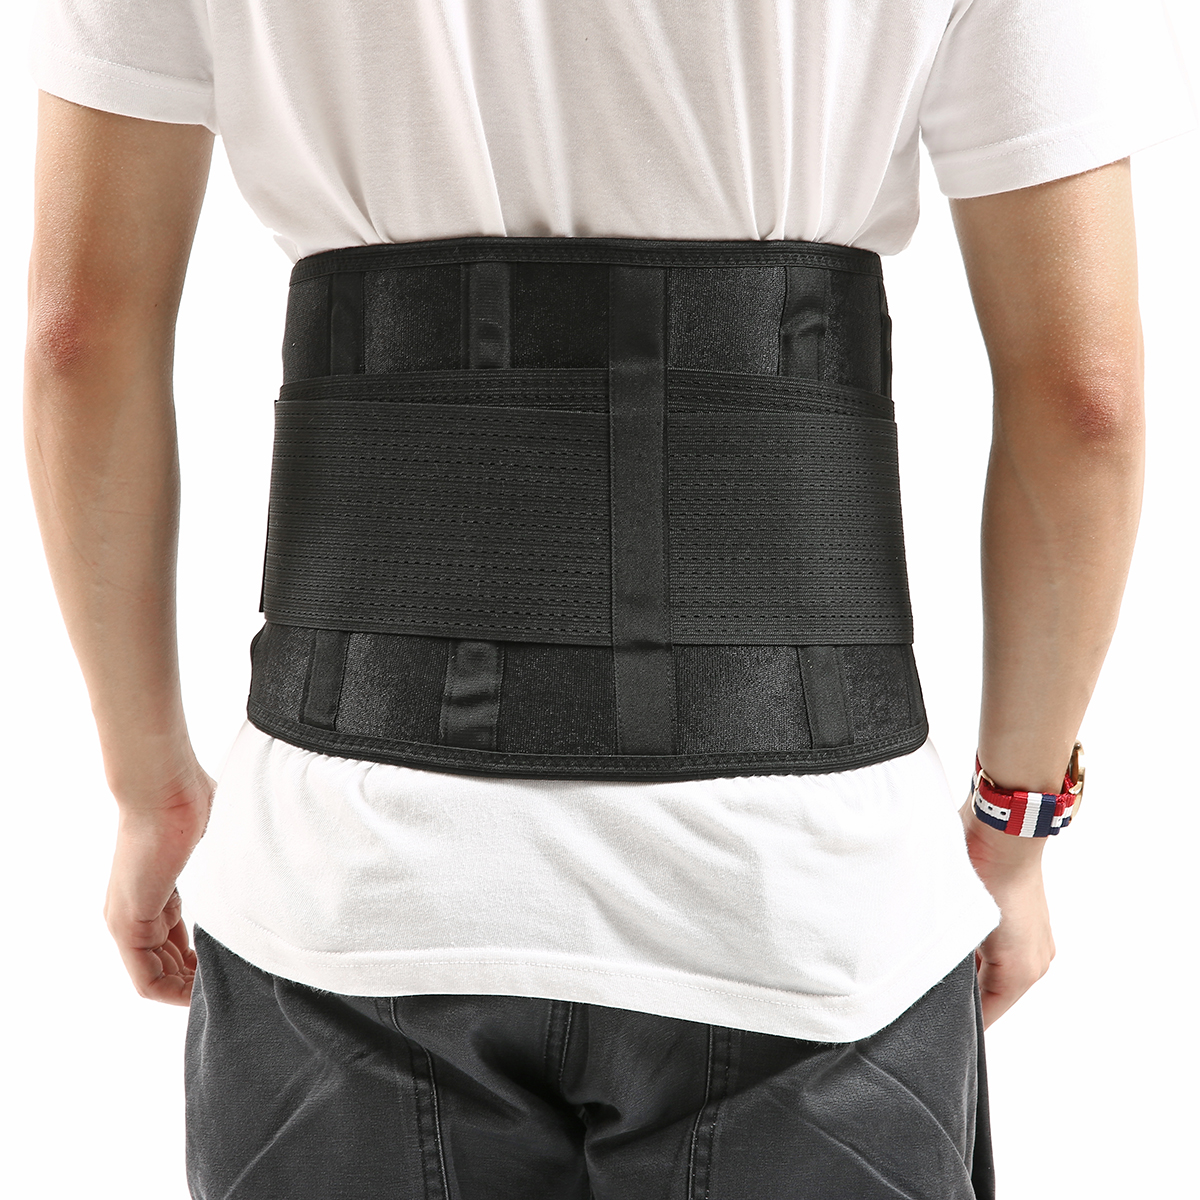 CHARMINER-Back-Support-Lumbar-Brace-Massage-Support-Belt-Dual-Adjustable-Belt-for-Pain-Relief-and-In-1884457-8